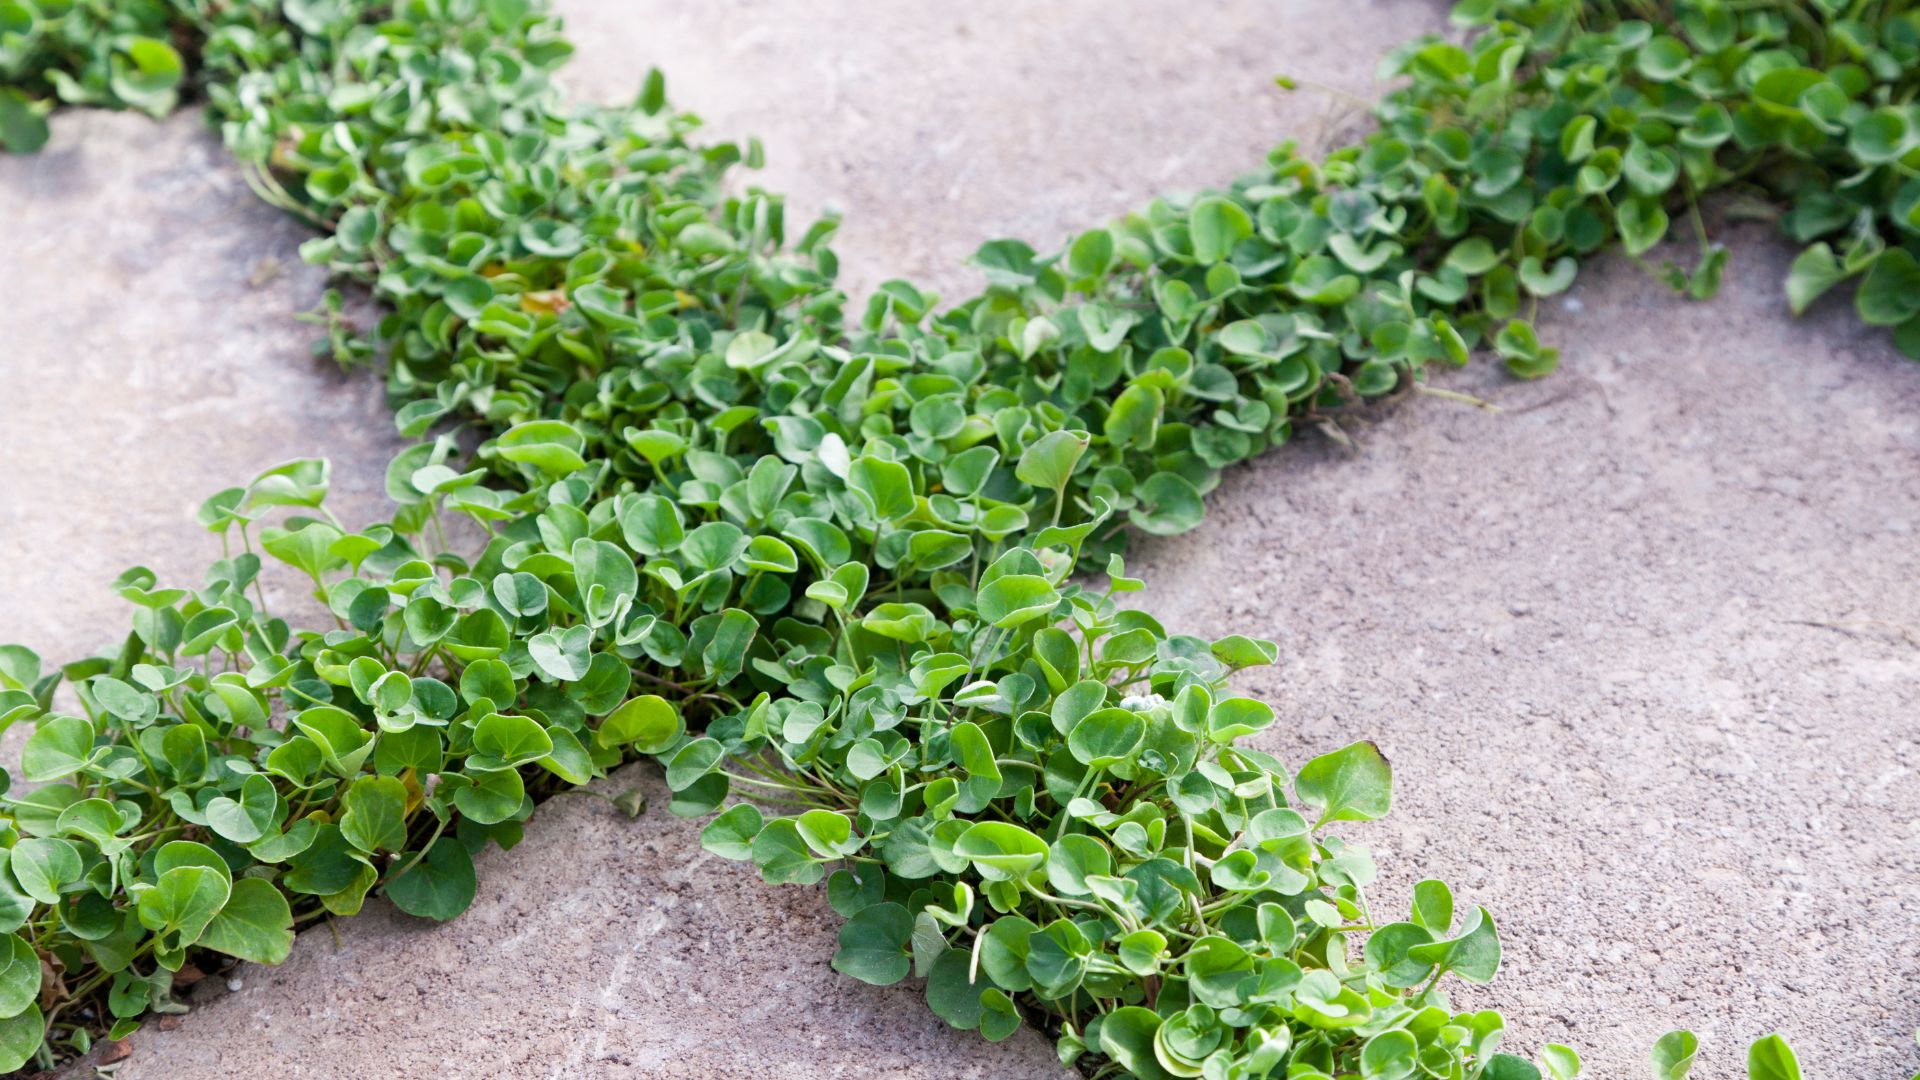 Discover The Perks Of Growing Dichondra Grass Instead Of A Traditional Lawn! 